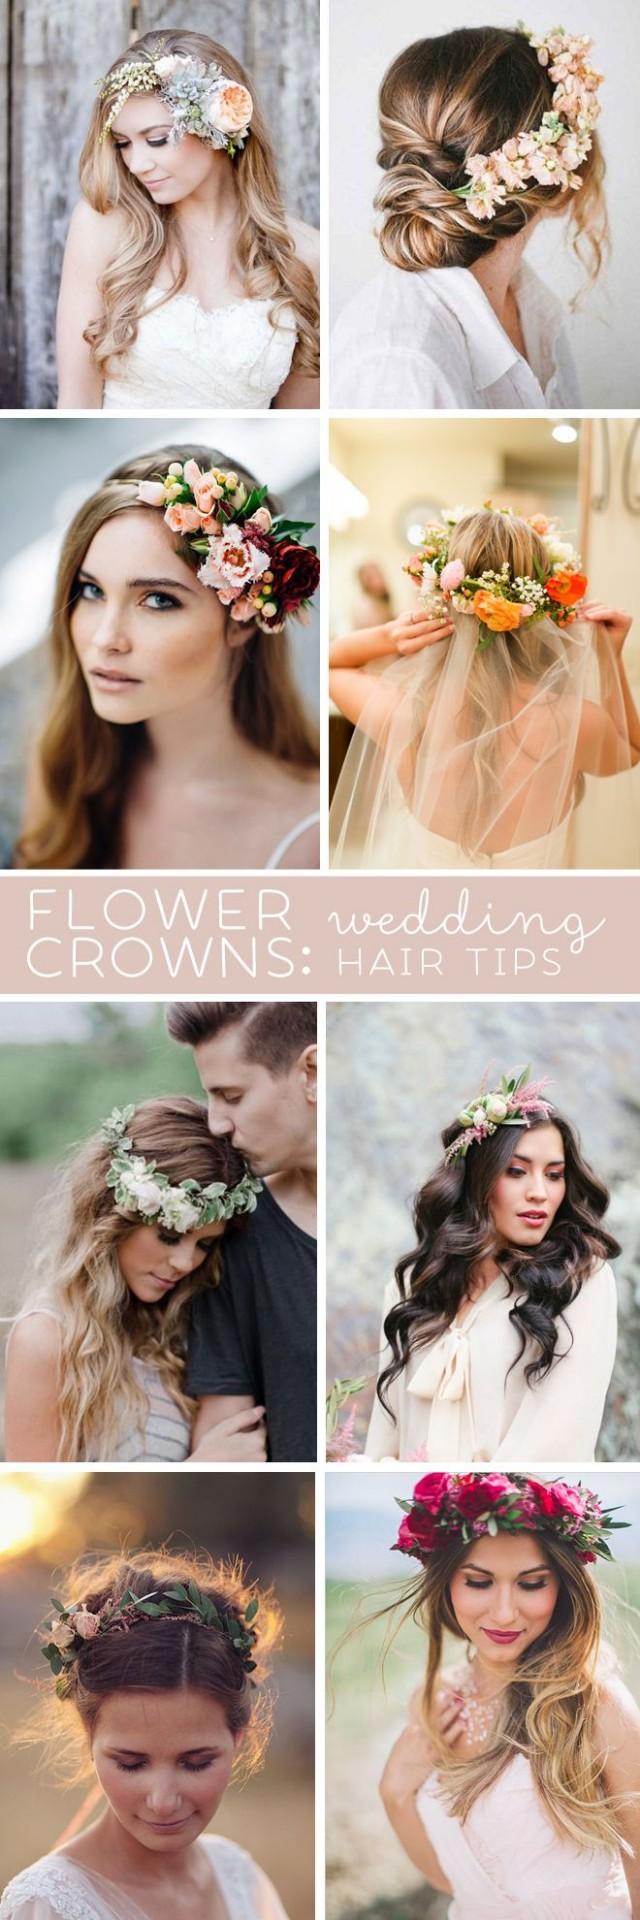 wedding photo - Awesome Wedding Hair Tips For Wearing Flower Crowns!